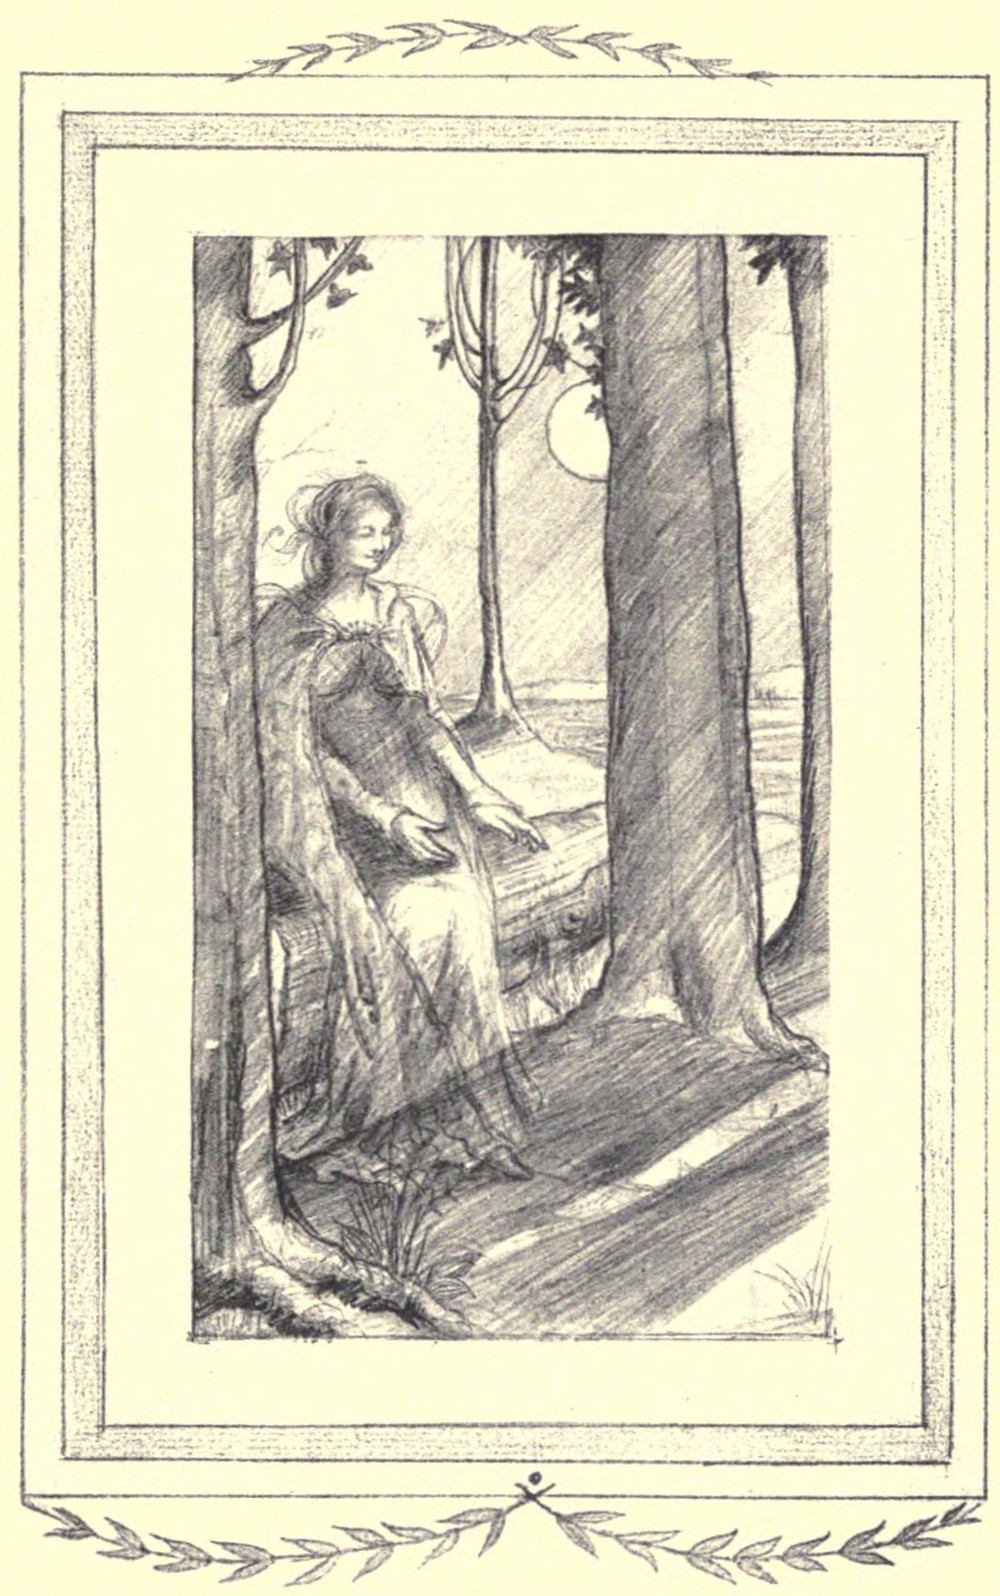 Illustration: He saw under the moon that lady sitting